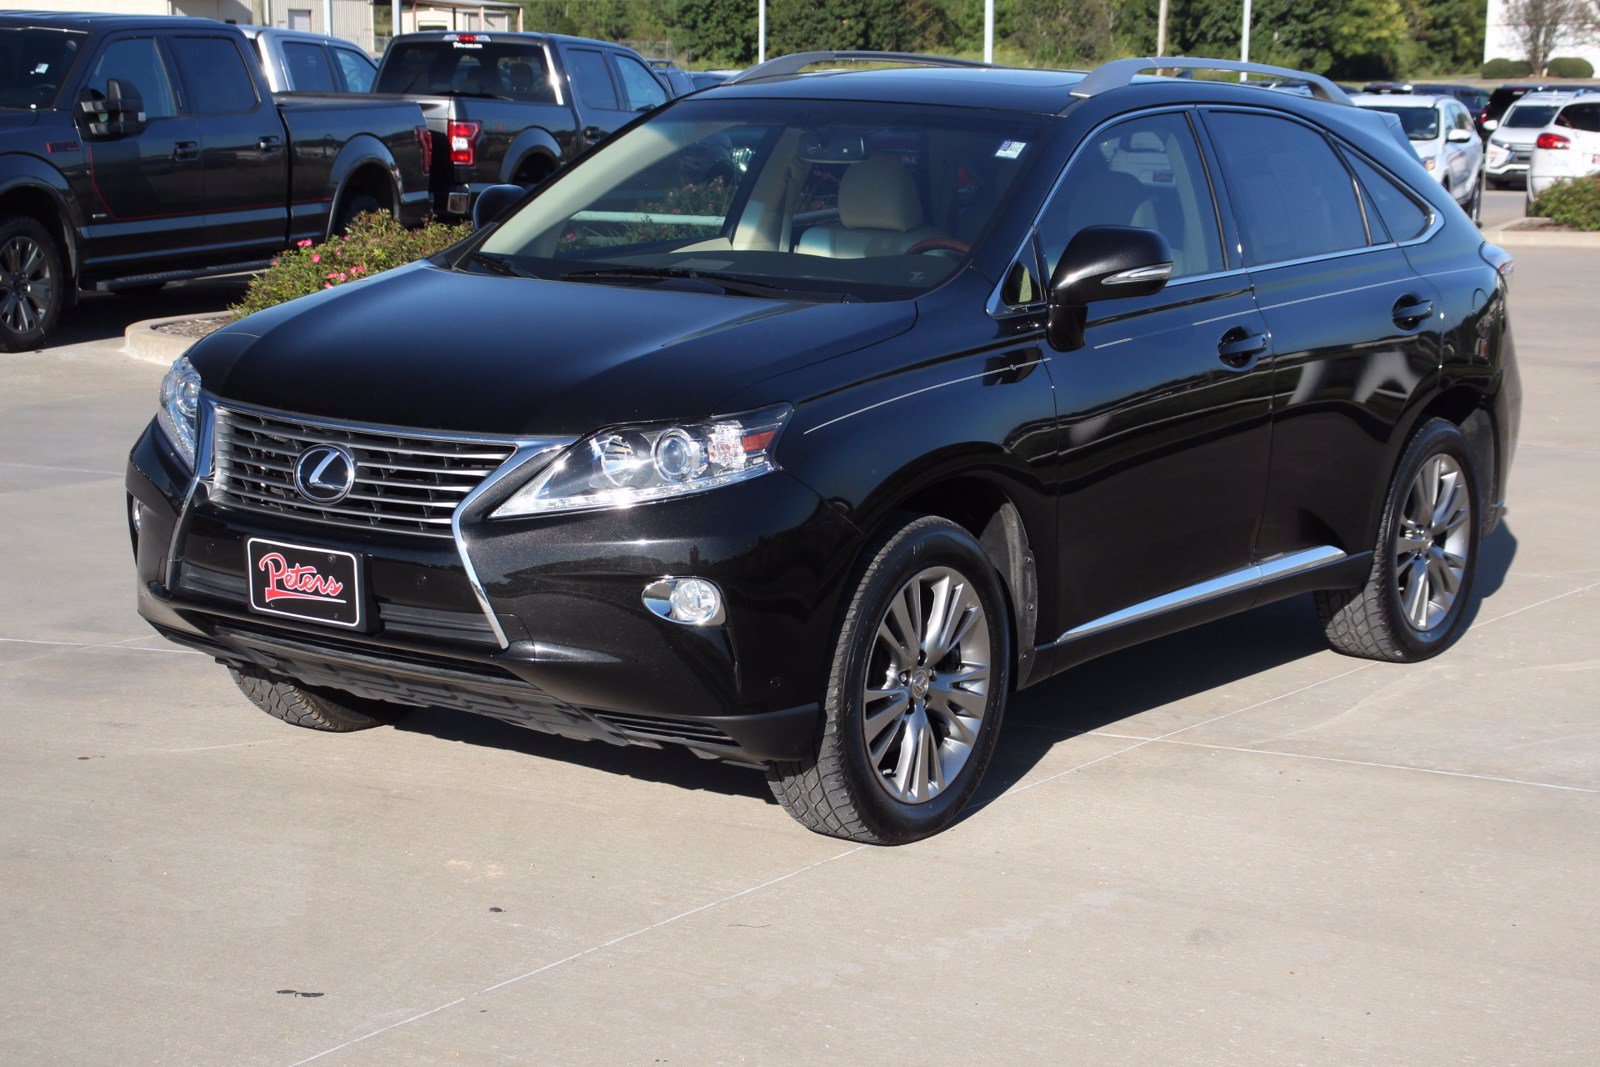 PreOwned 2014 Lexus RX 350 SUV in Longview A4581